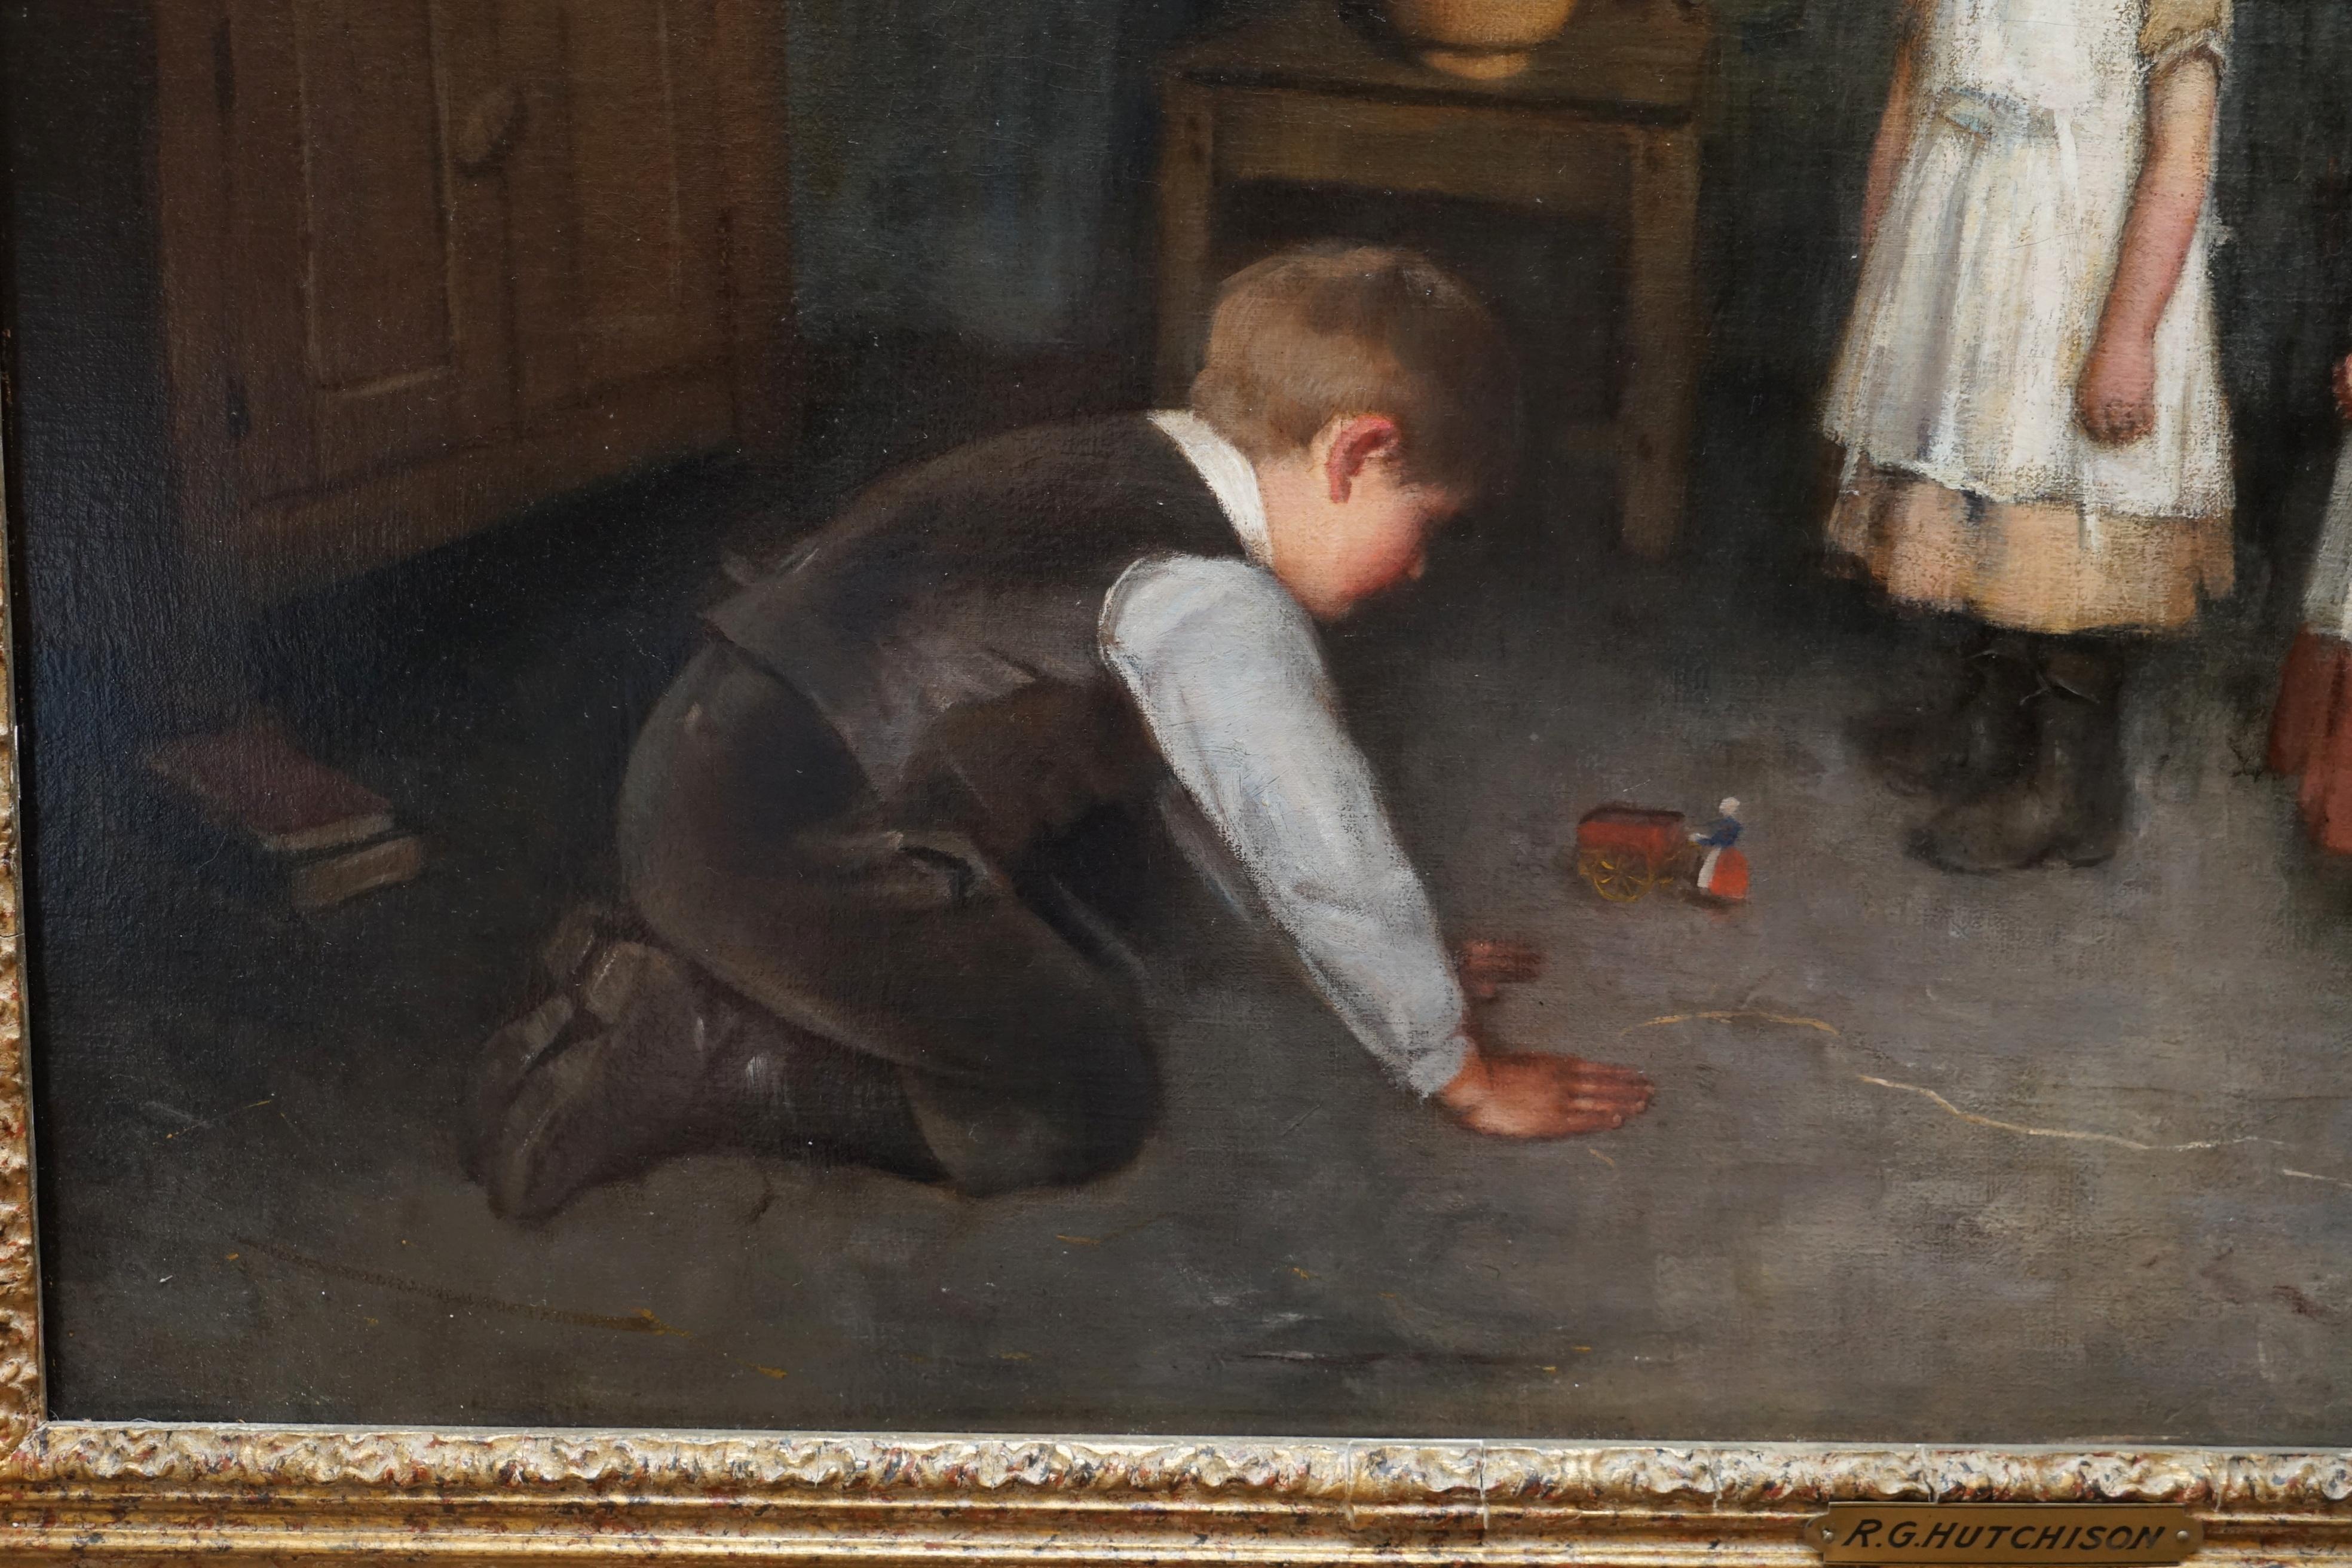 Victorian Original circa 1880-90 Robert Gemmell Hutchison Oil on Canvas Painting a New Toy For Sale